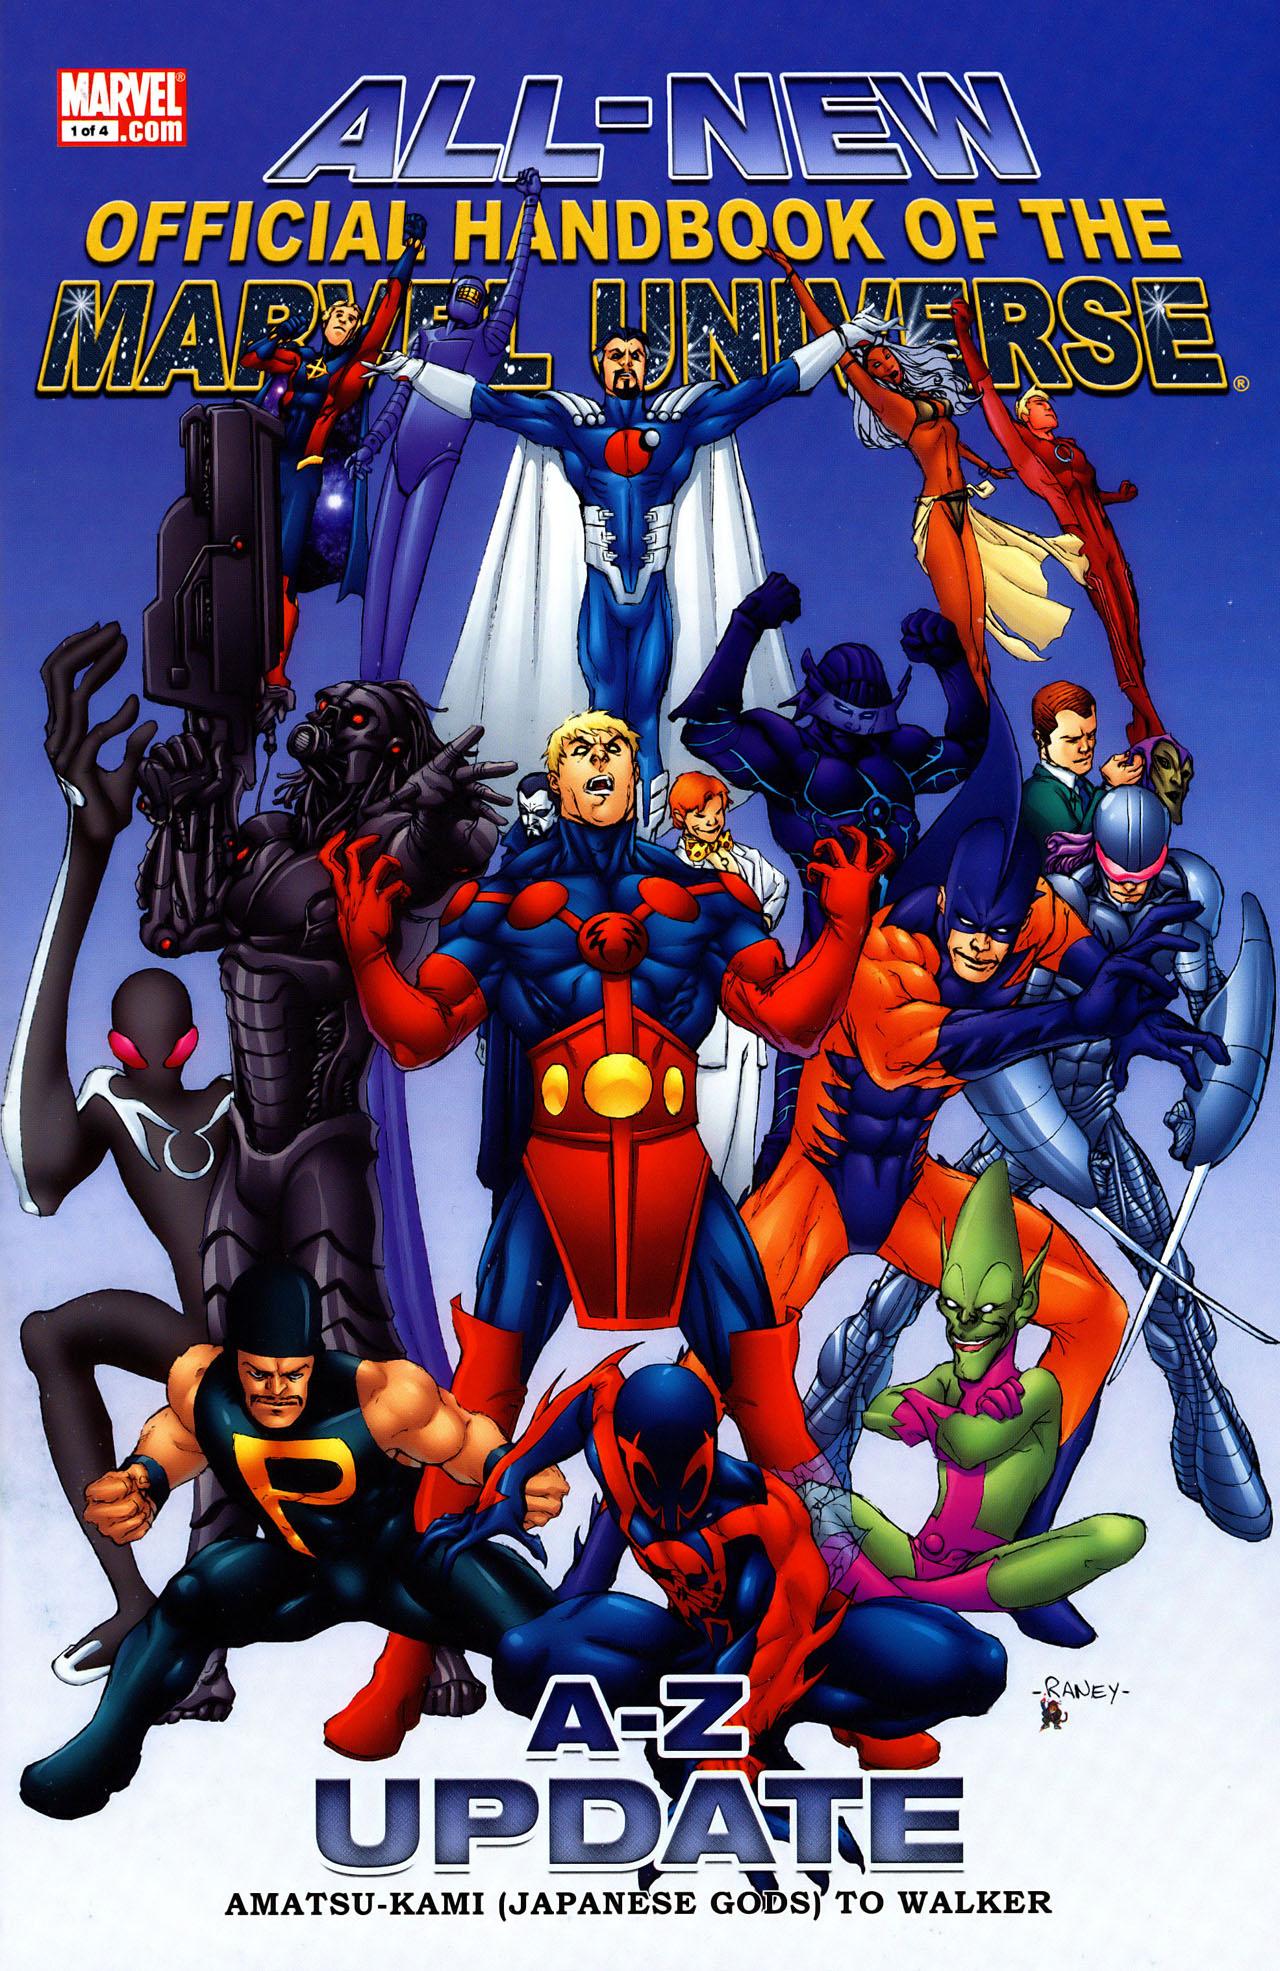 All-New Official Handbook of the Marvel Universe Update Vol. 1 #1